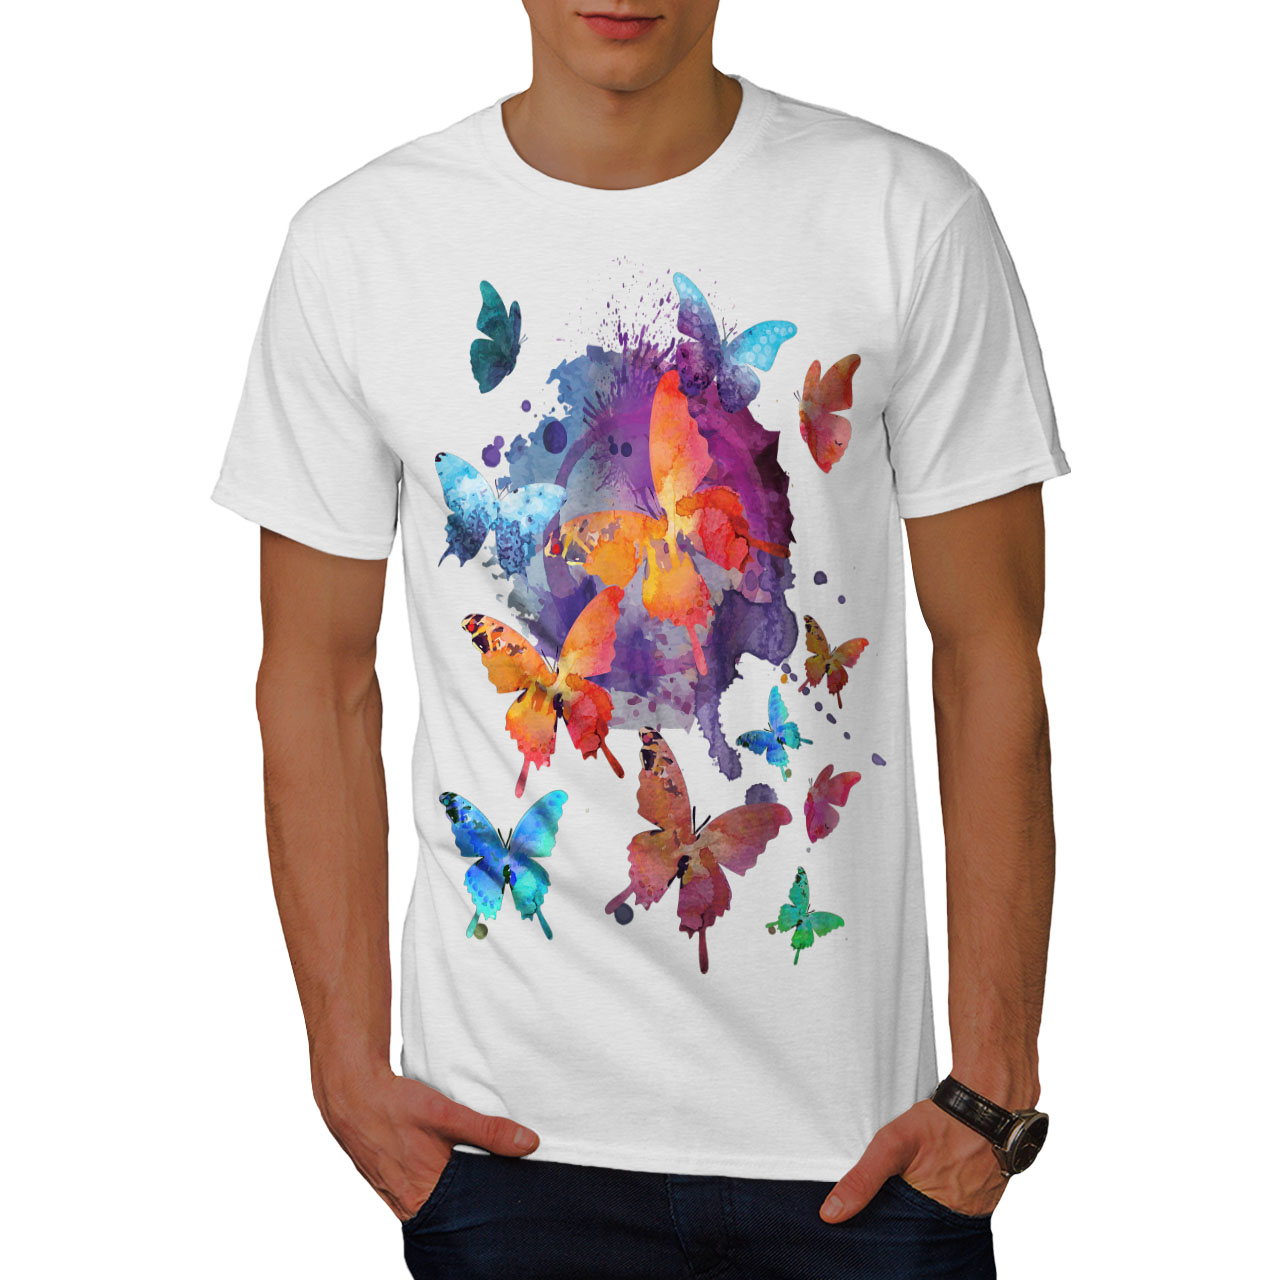 Wellcoda Butterfly Colorful Mens T-shirt, Nature Graphic Design Printed ...